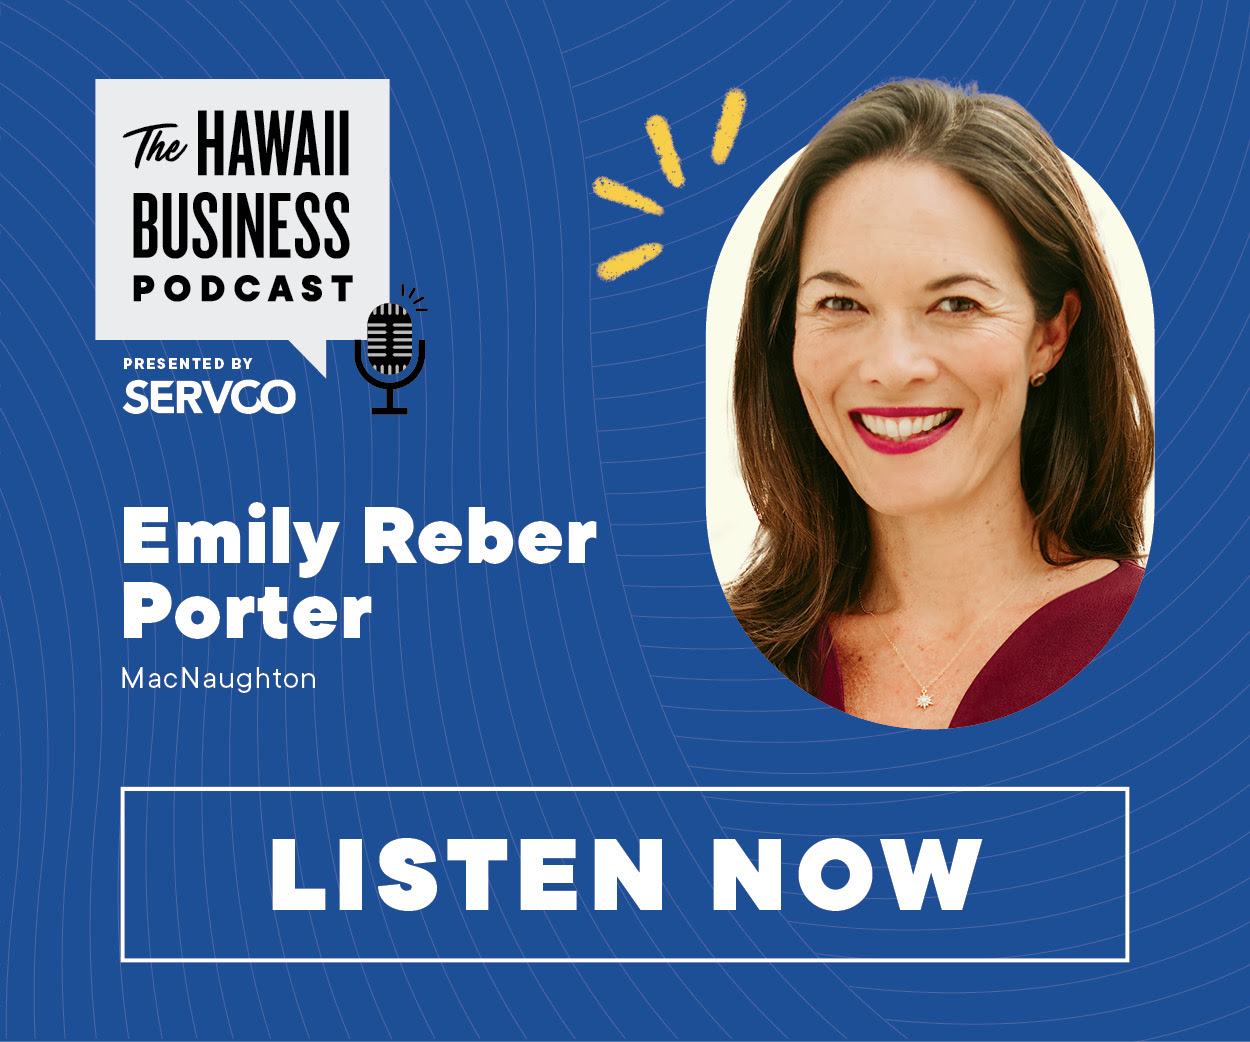 Click here to listen to the this episode of The Hawaii Business Podcast featuring Emily Reber Porter or MacNaughton!